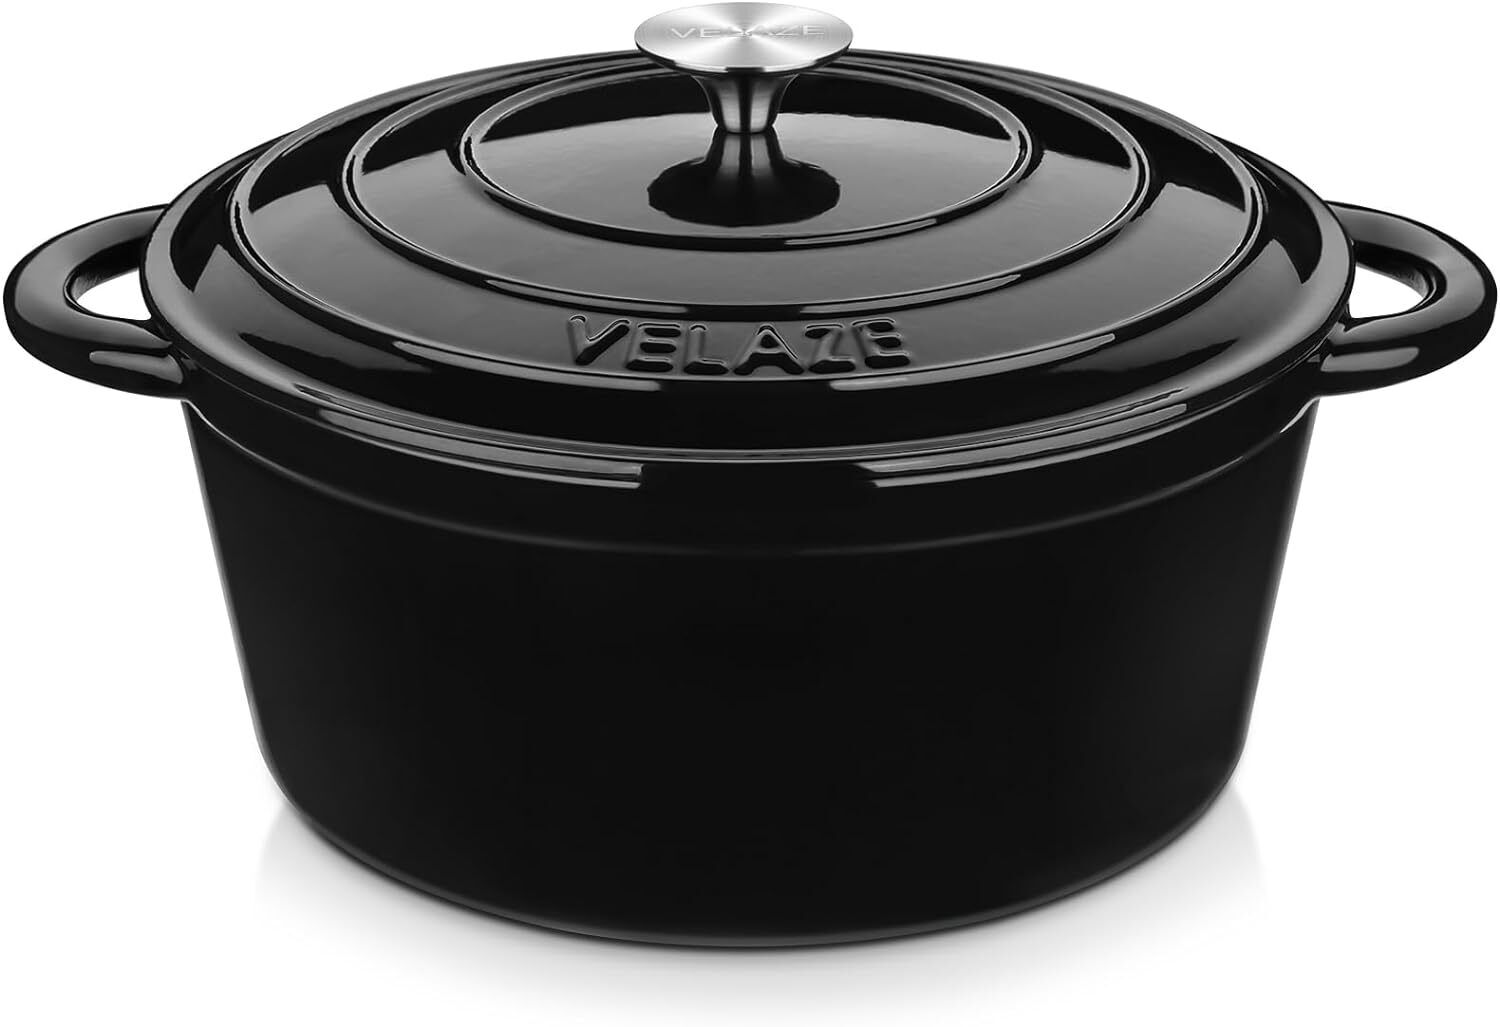 7.5 QT Dutch Oven Pot with Lid, Enameled Cast Iron Dutch Oven with Dual Handles